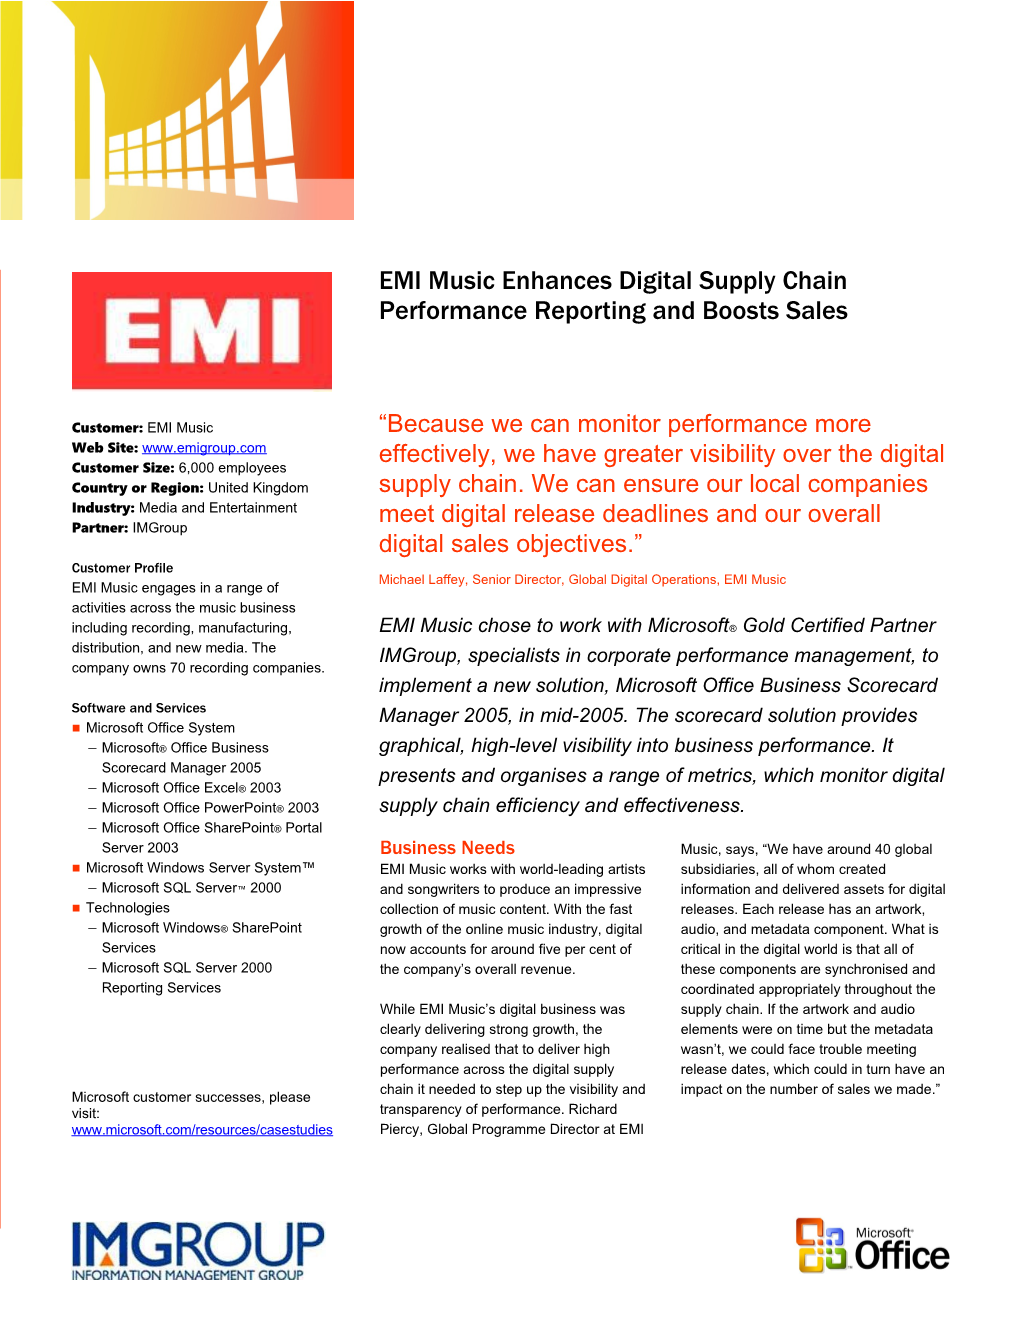 EMI Music Enhances Digital Supply Chain Performance Reporting and Boosts Sales